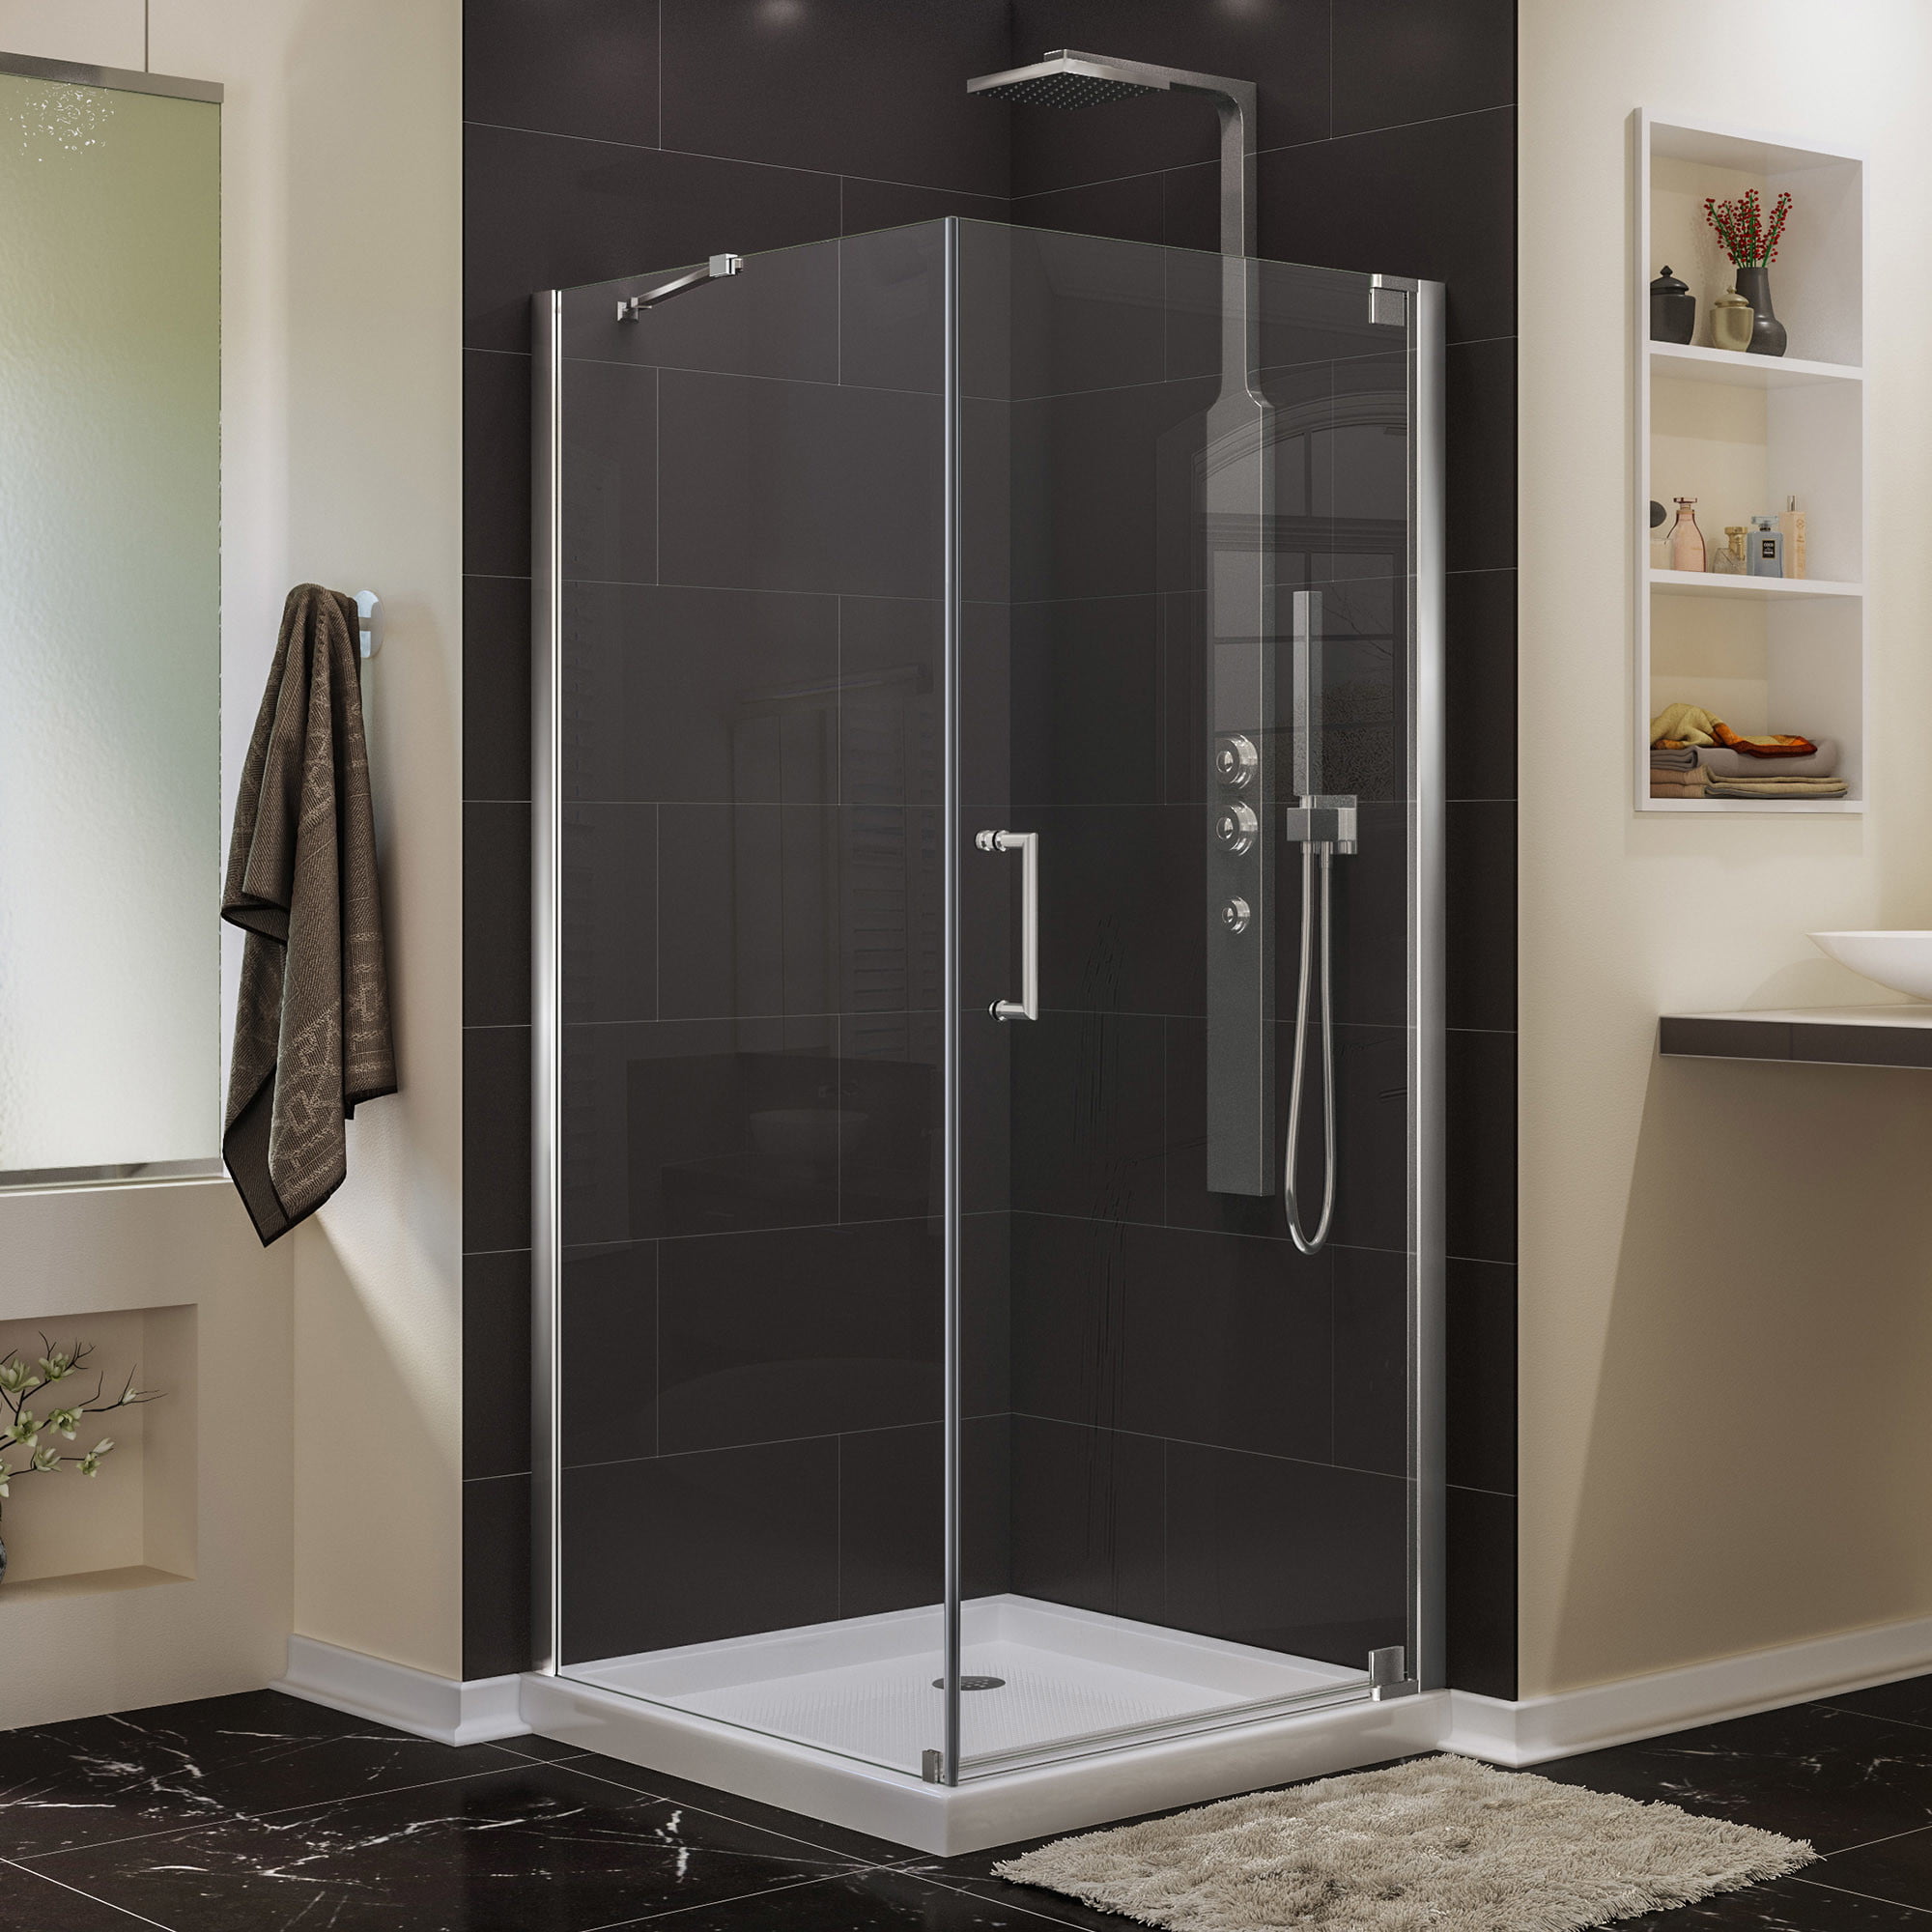 Shower Enclosure Safety Glass 35.4x31.5x70.9